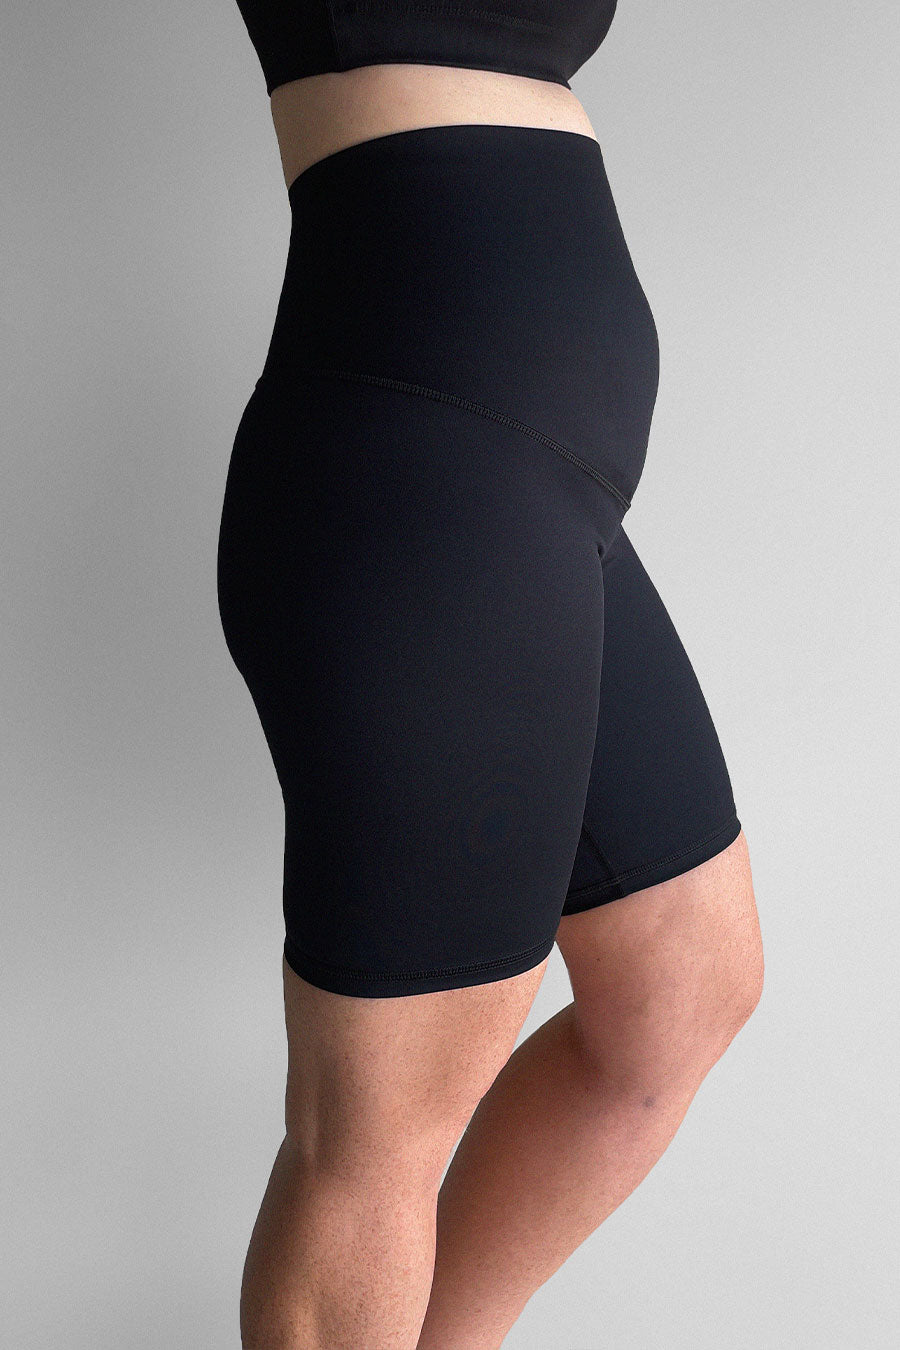 Endometriosis Support Bike Short - Black from Active Truth™
